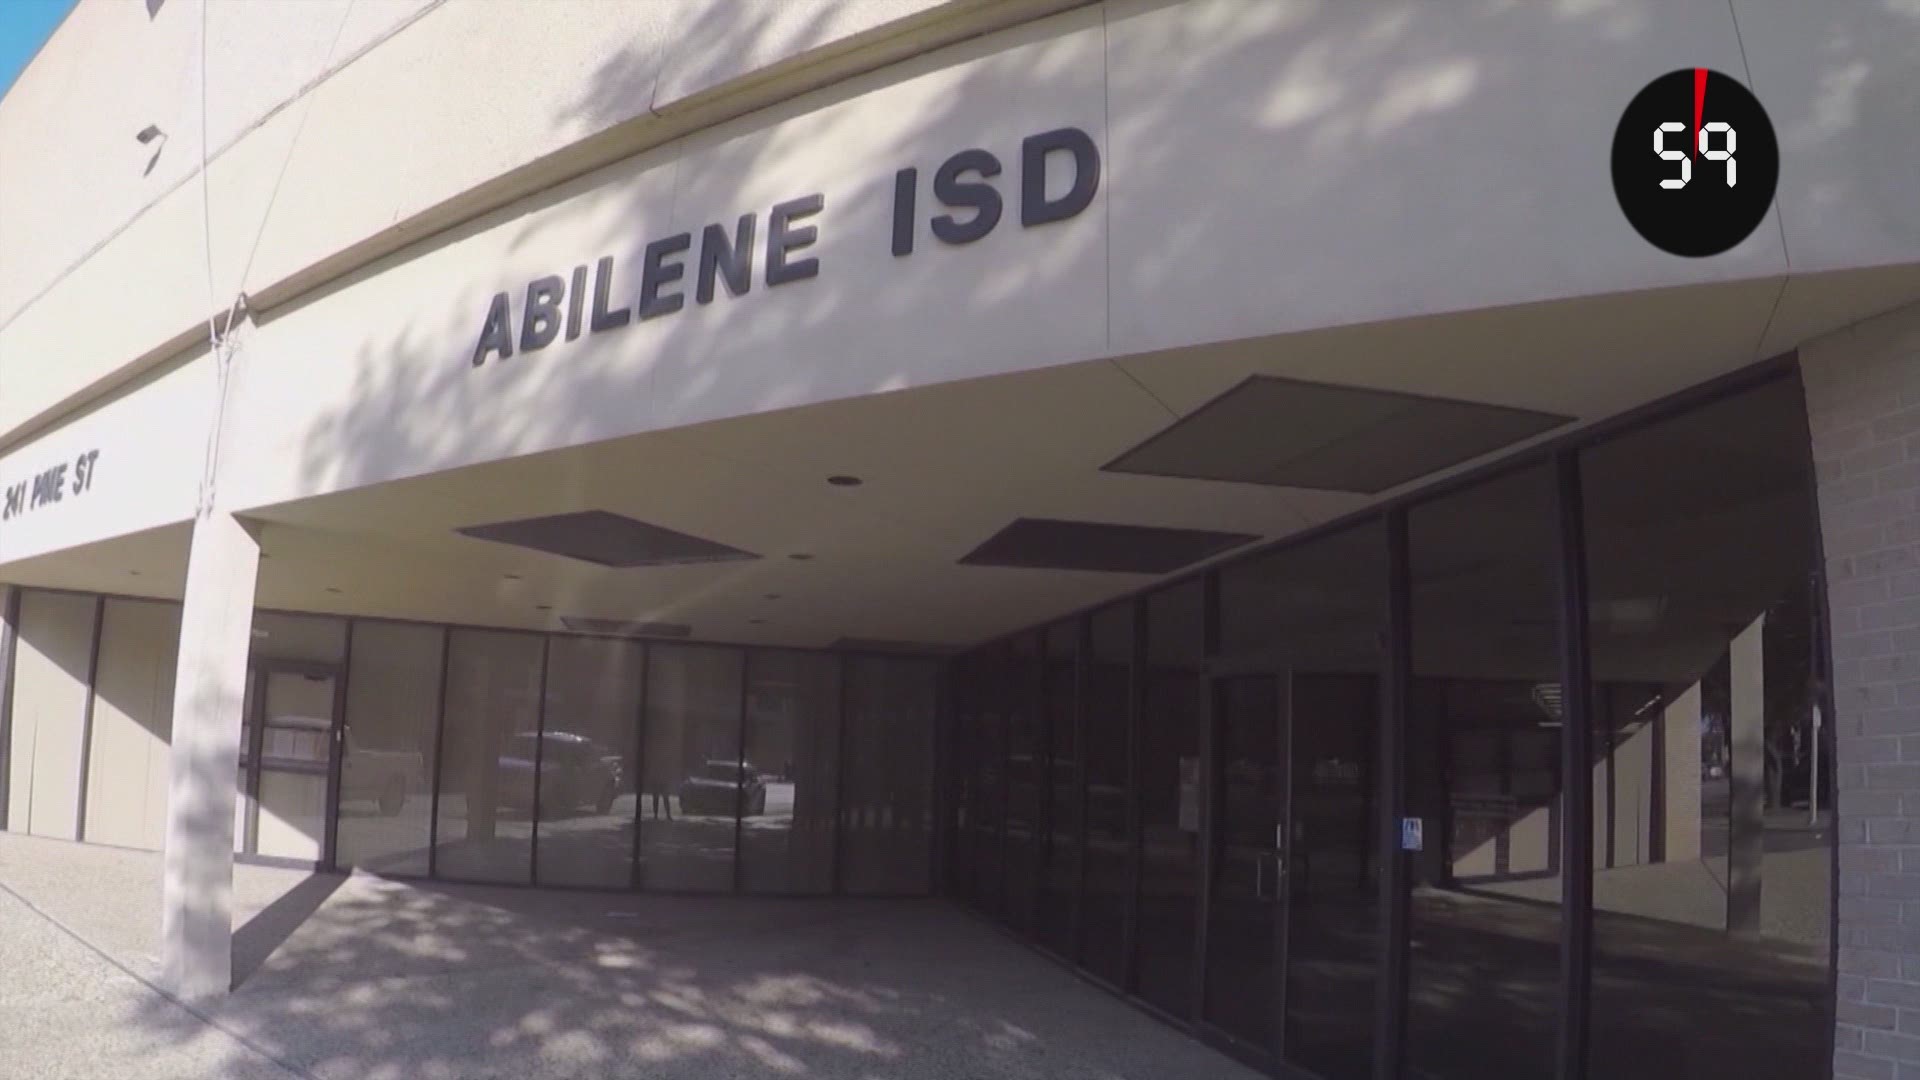 The Abilene ISD Board of Trustees took the next step in the re-naming of four elementary campuses named for Confederate figures Monday night